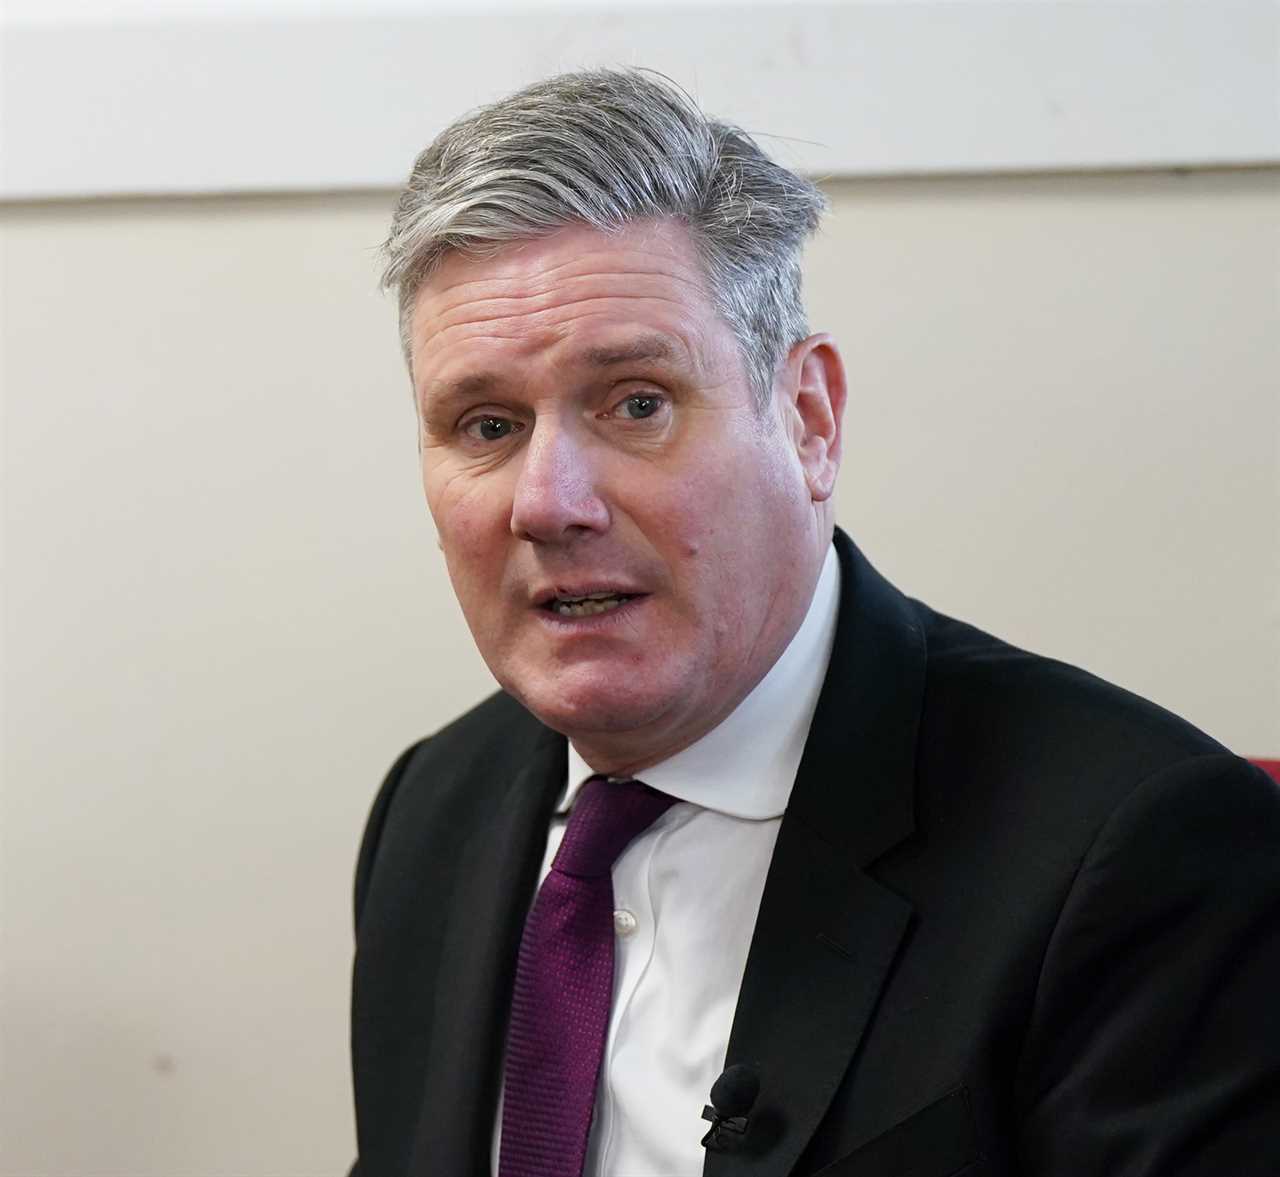 Squirming Sir Keir Starmer insist Brits do not care about his gender ID blunder